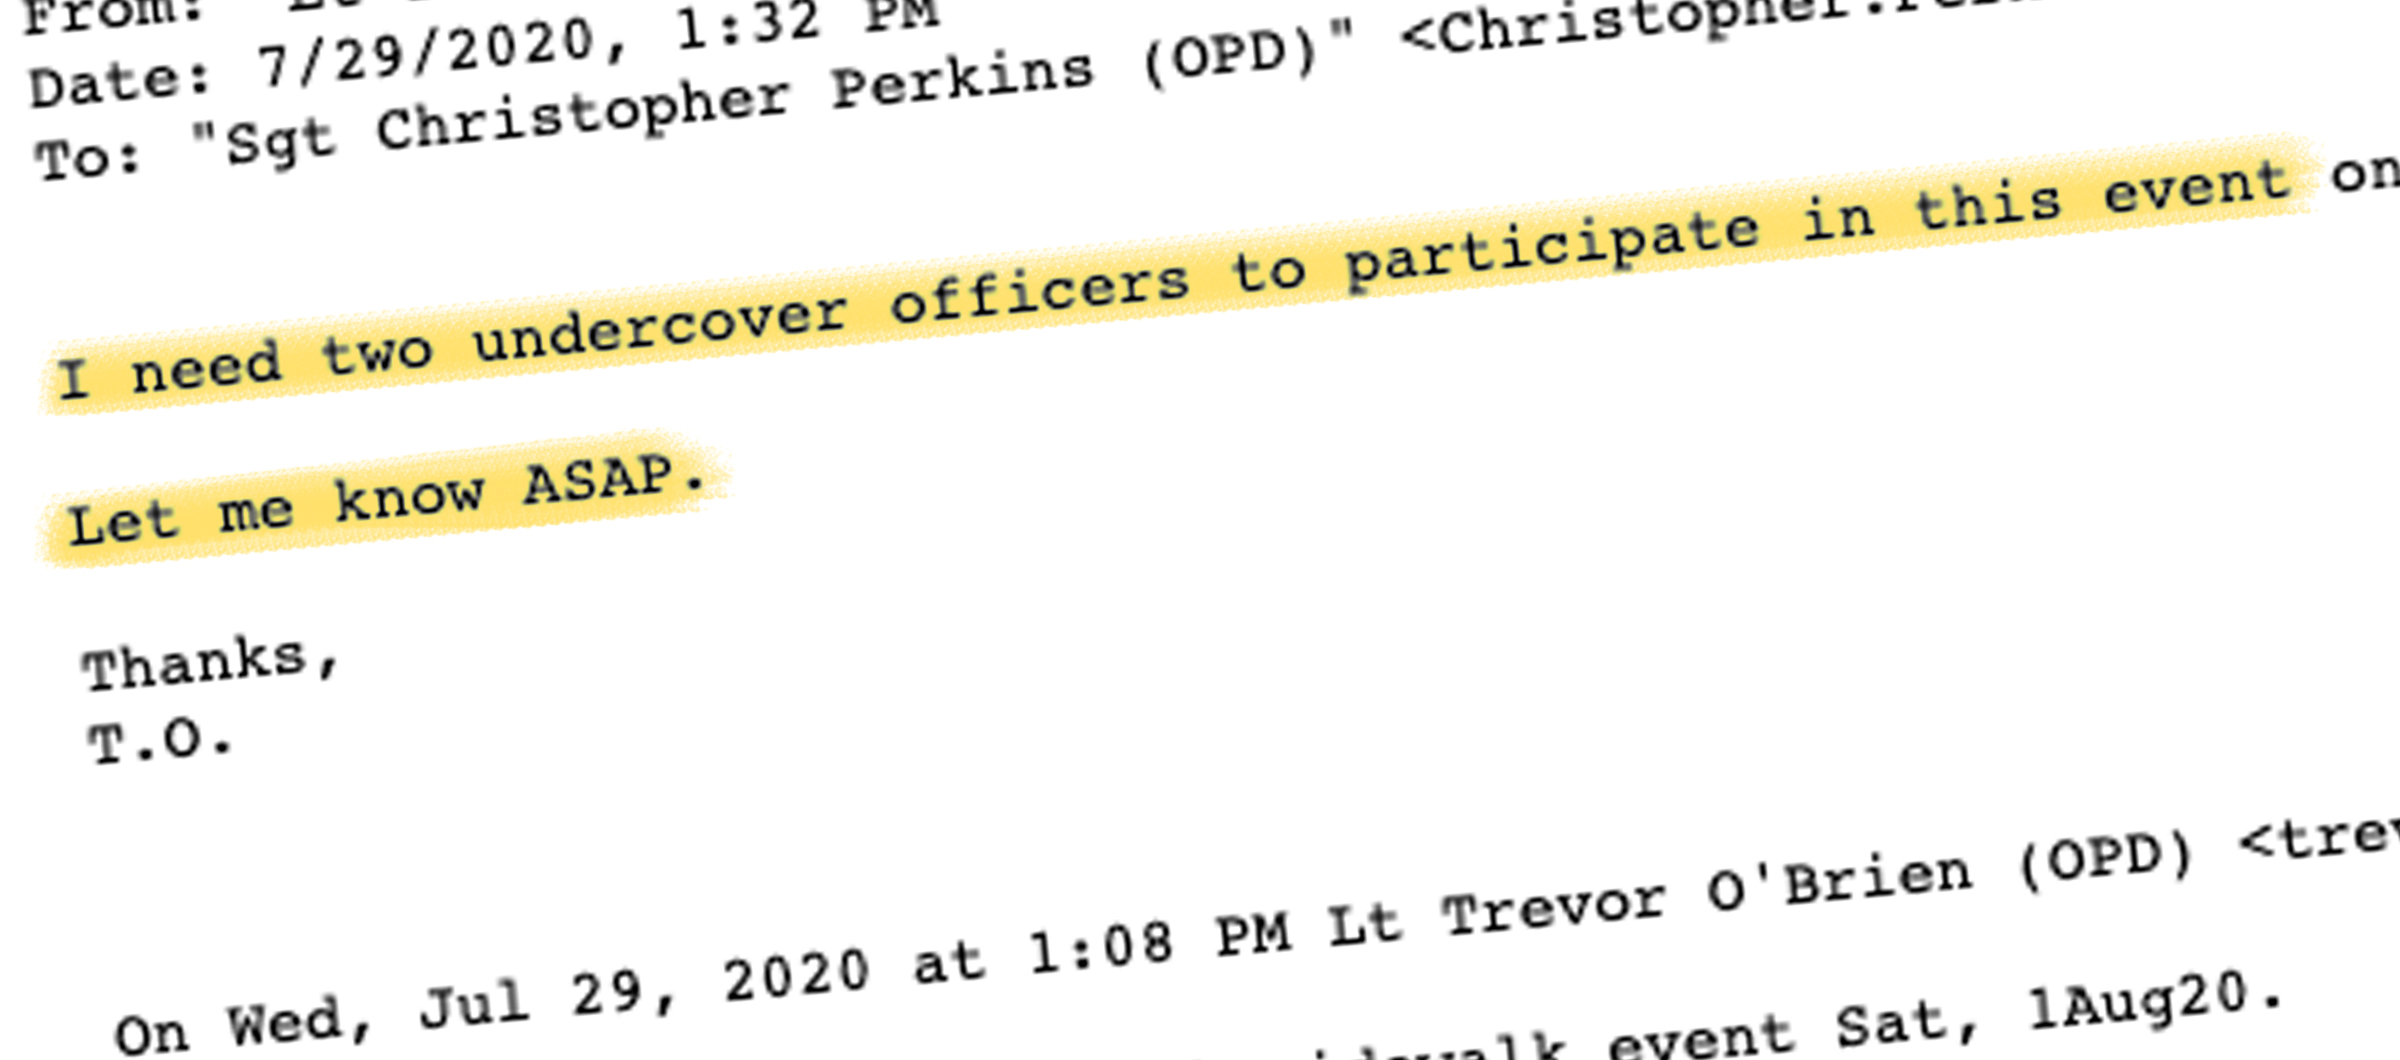 An excerpt of a highlighted email reading "I need two undercover officers to participate in this event"